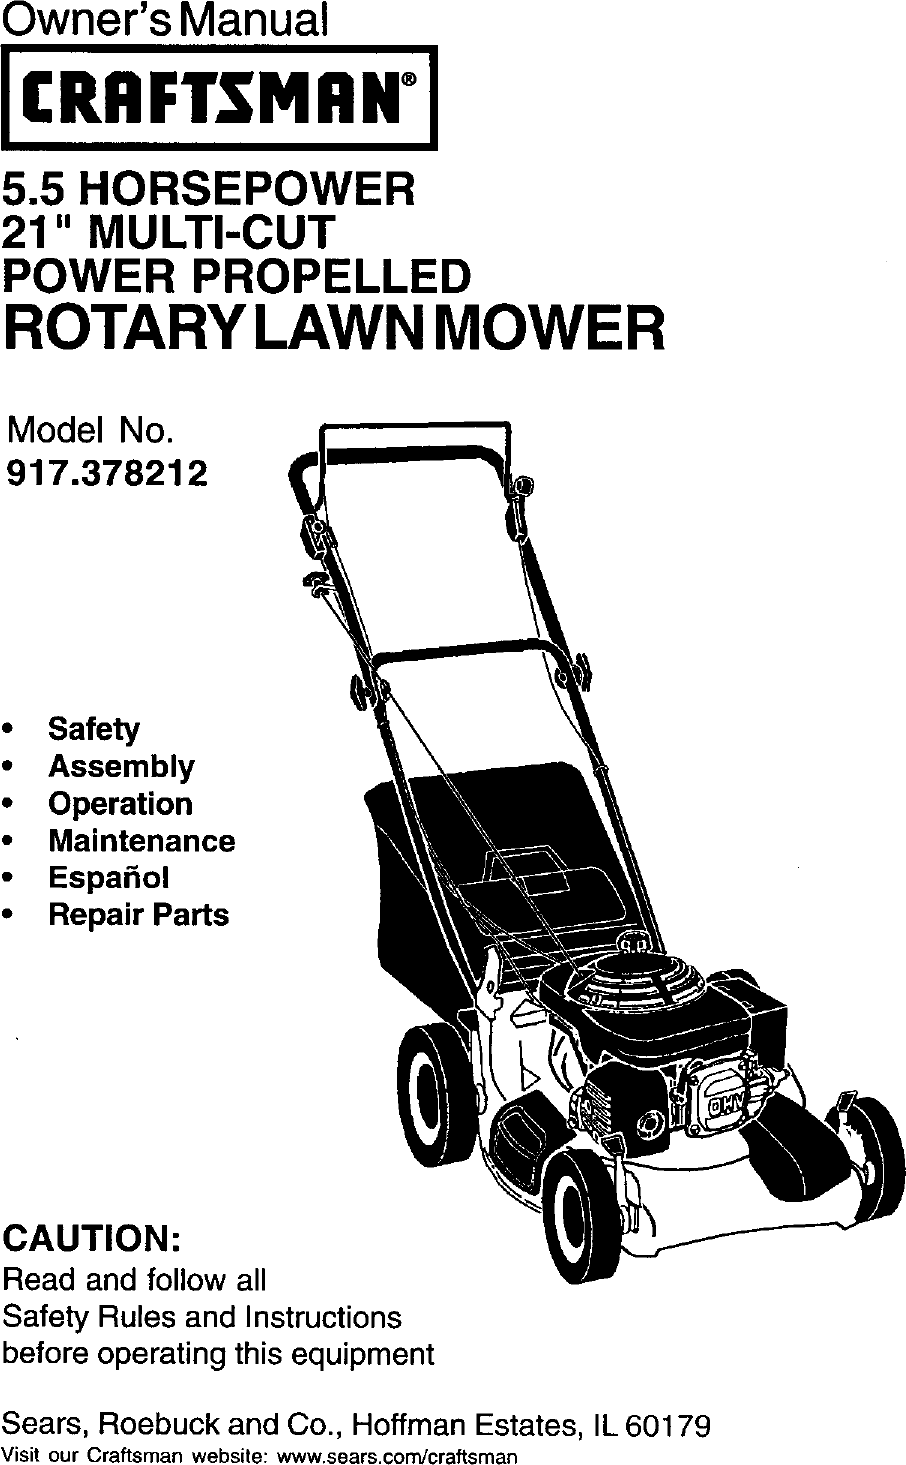 Craftsman User Manual LAWN MOWER Manuals And Guides L